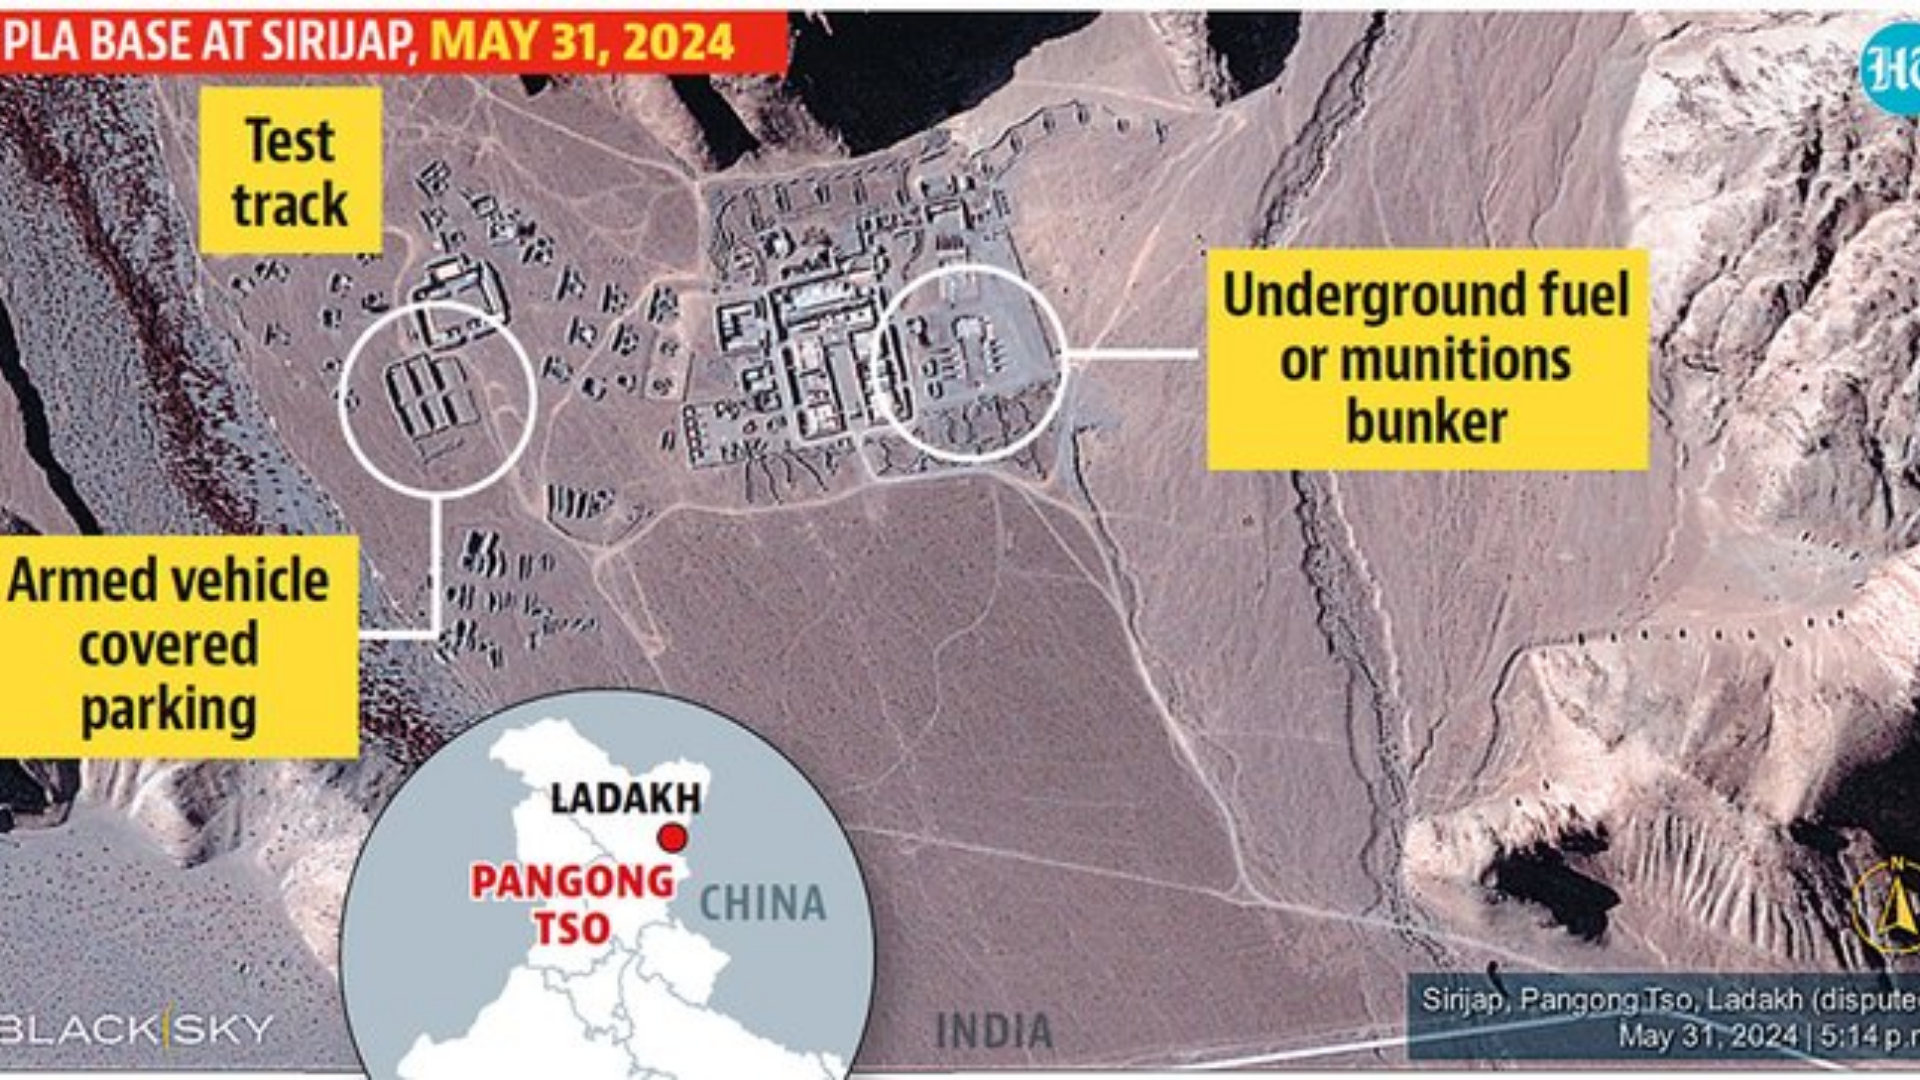 Indian Authorities Caught Off-Gaurd: Satellite Images Show China Digging Underground Bunkers